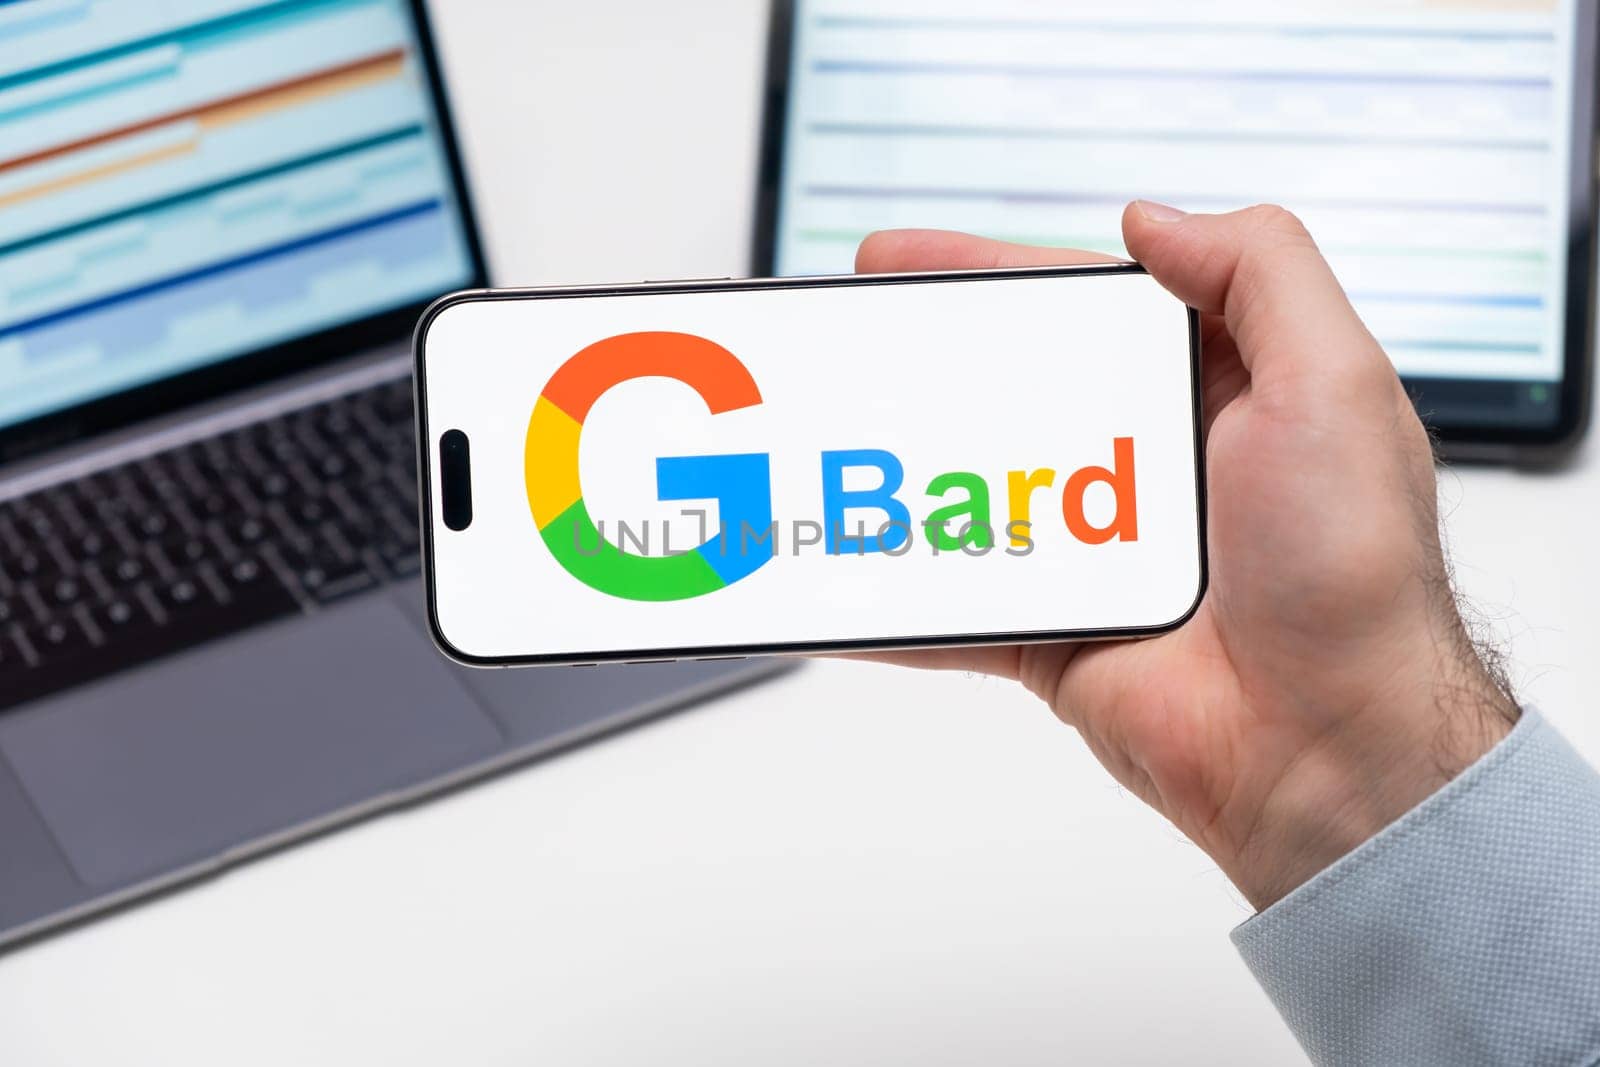 Gbard logo of app on the screen of mobile phone held by man in front of the laptop and tablet by vladimka